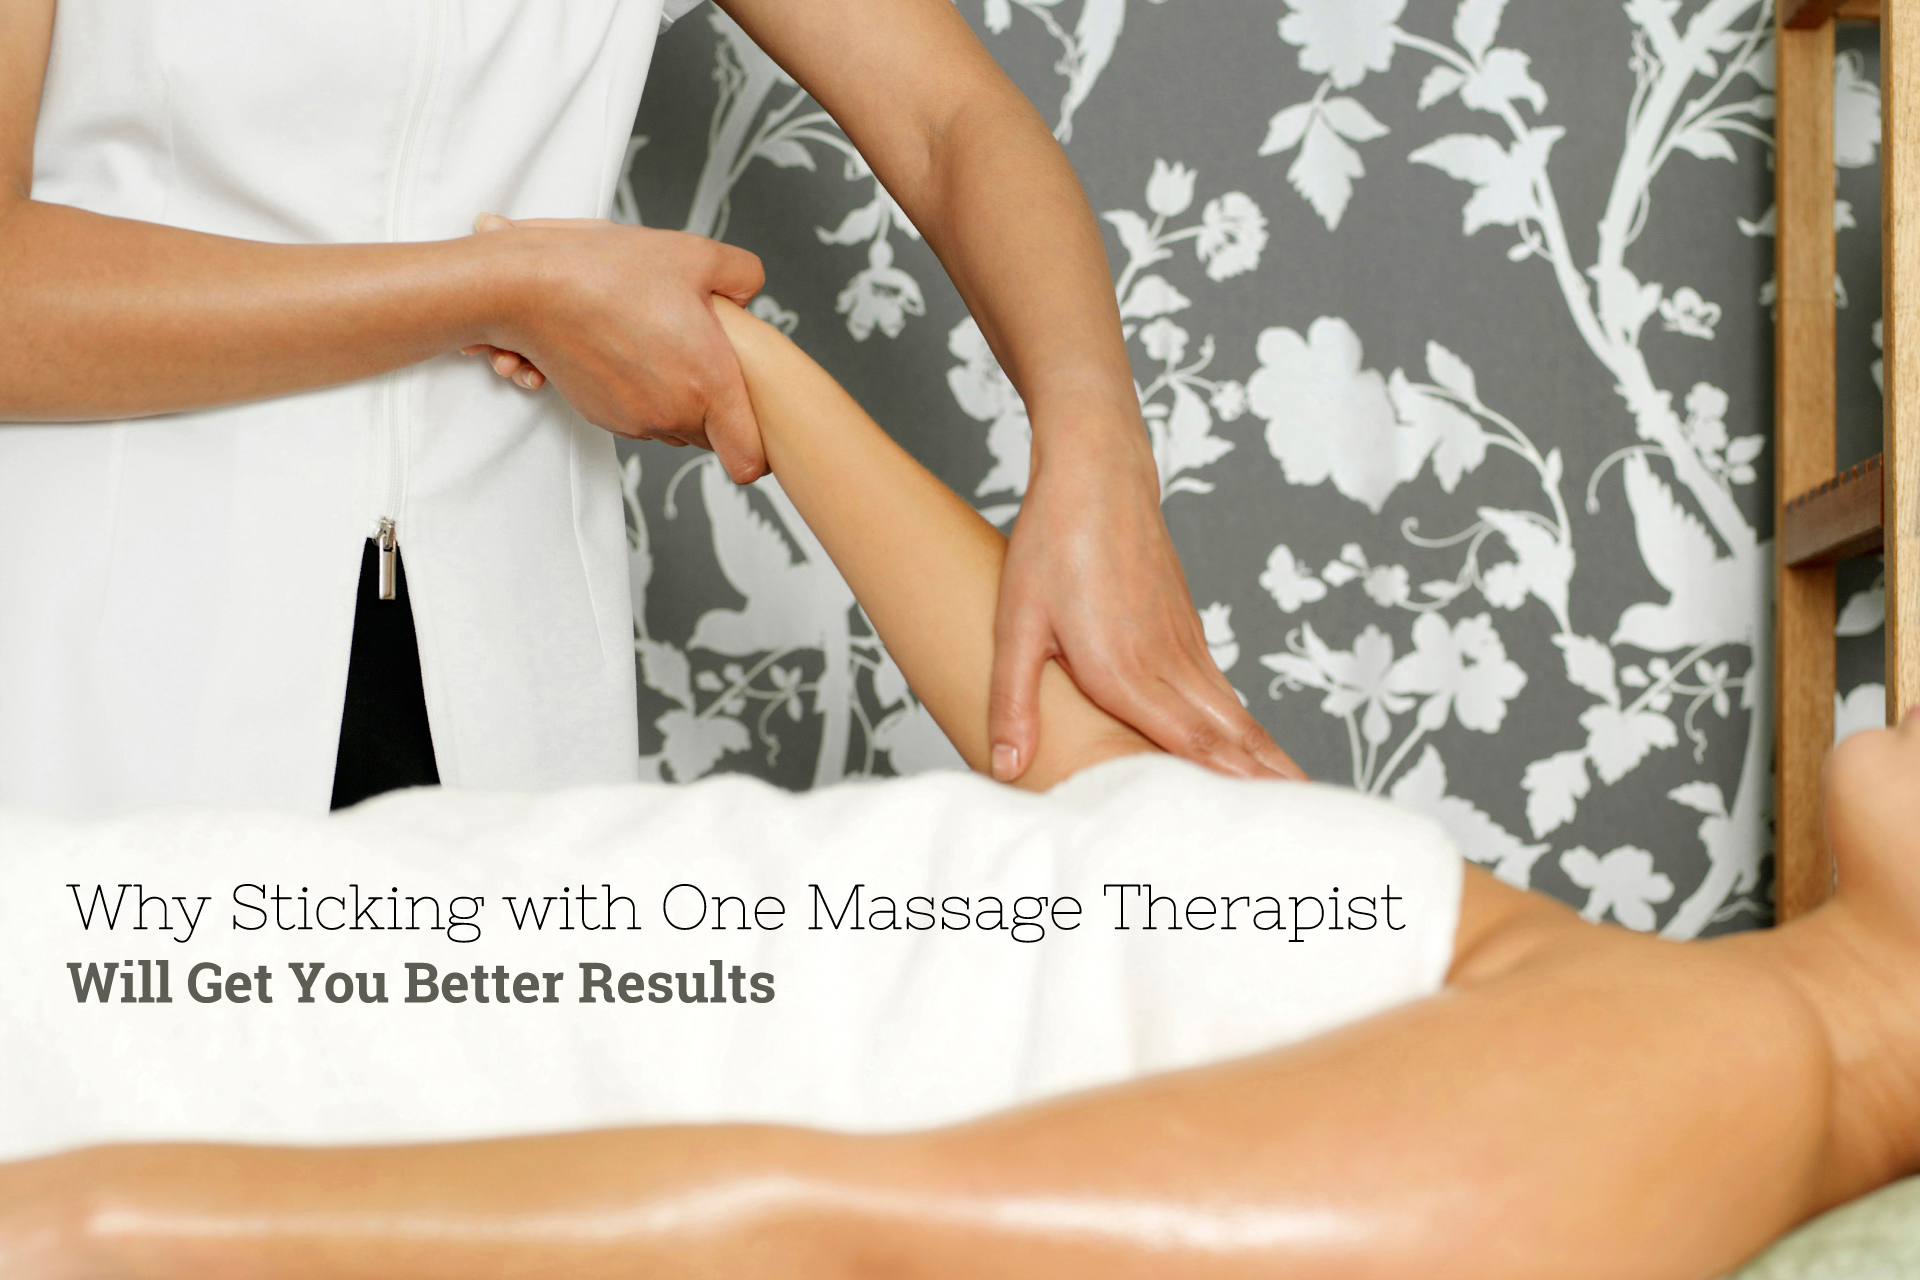 Why Sticking with One Massage Therapist Will Get You Better Results